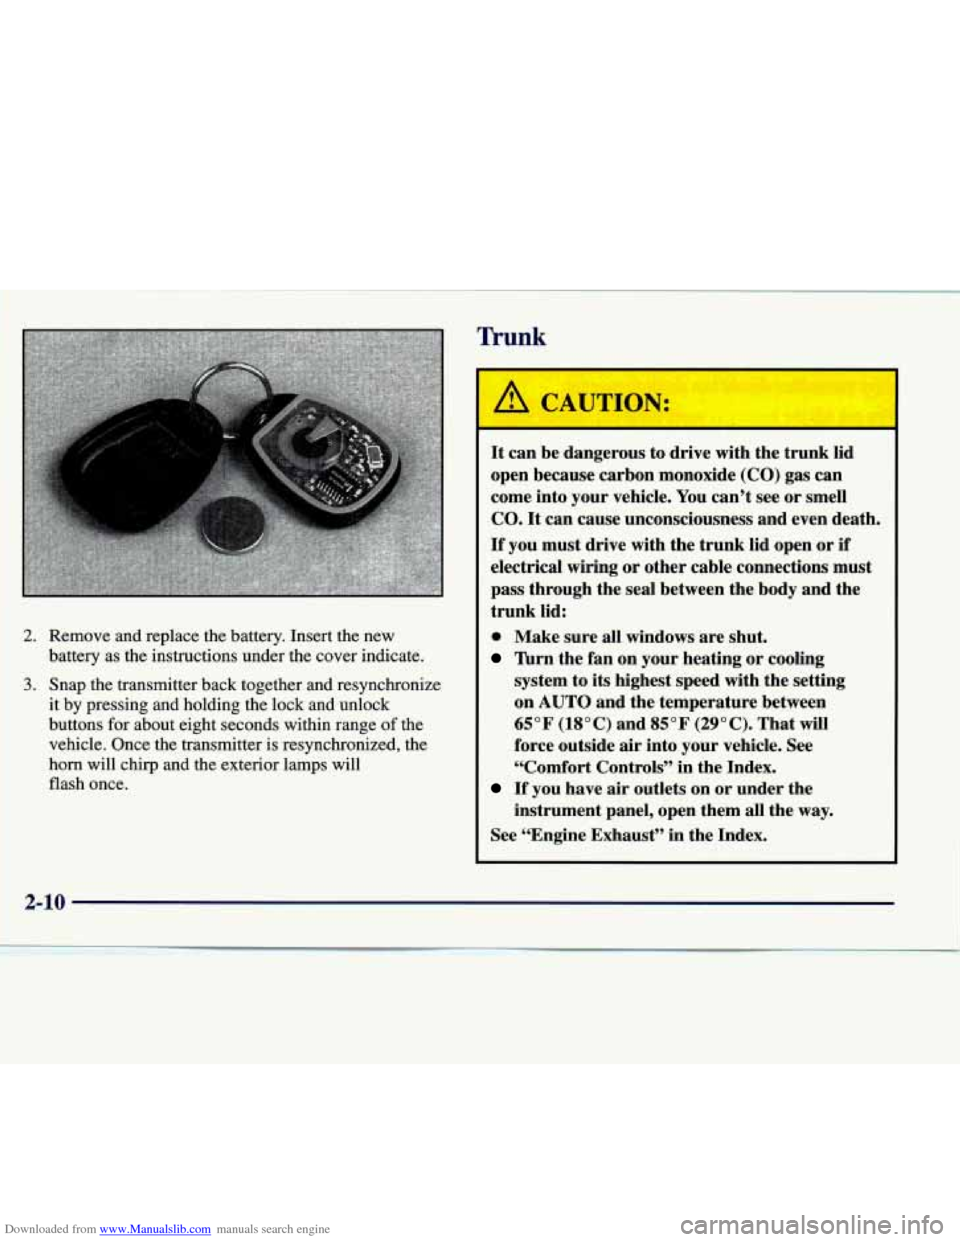 CADILLAC SEVILLE 1998 4.G Owners Manual Downloaded from www.Manualslib.com manuals search engine Trunk 
2. Remove  and  replace  the  battery.  Insert  the  new 
battery as the  instructions  under  the  cover  indicate. 
3. Snap  the  tran